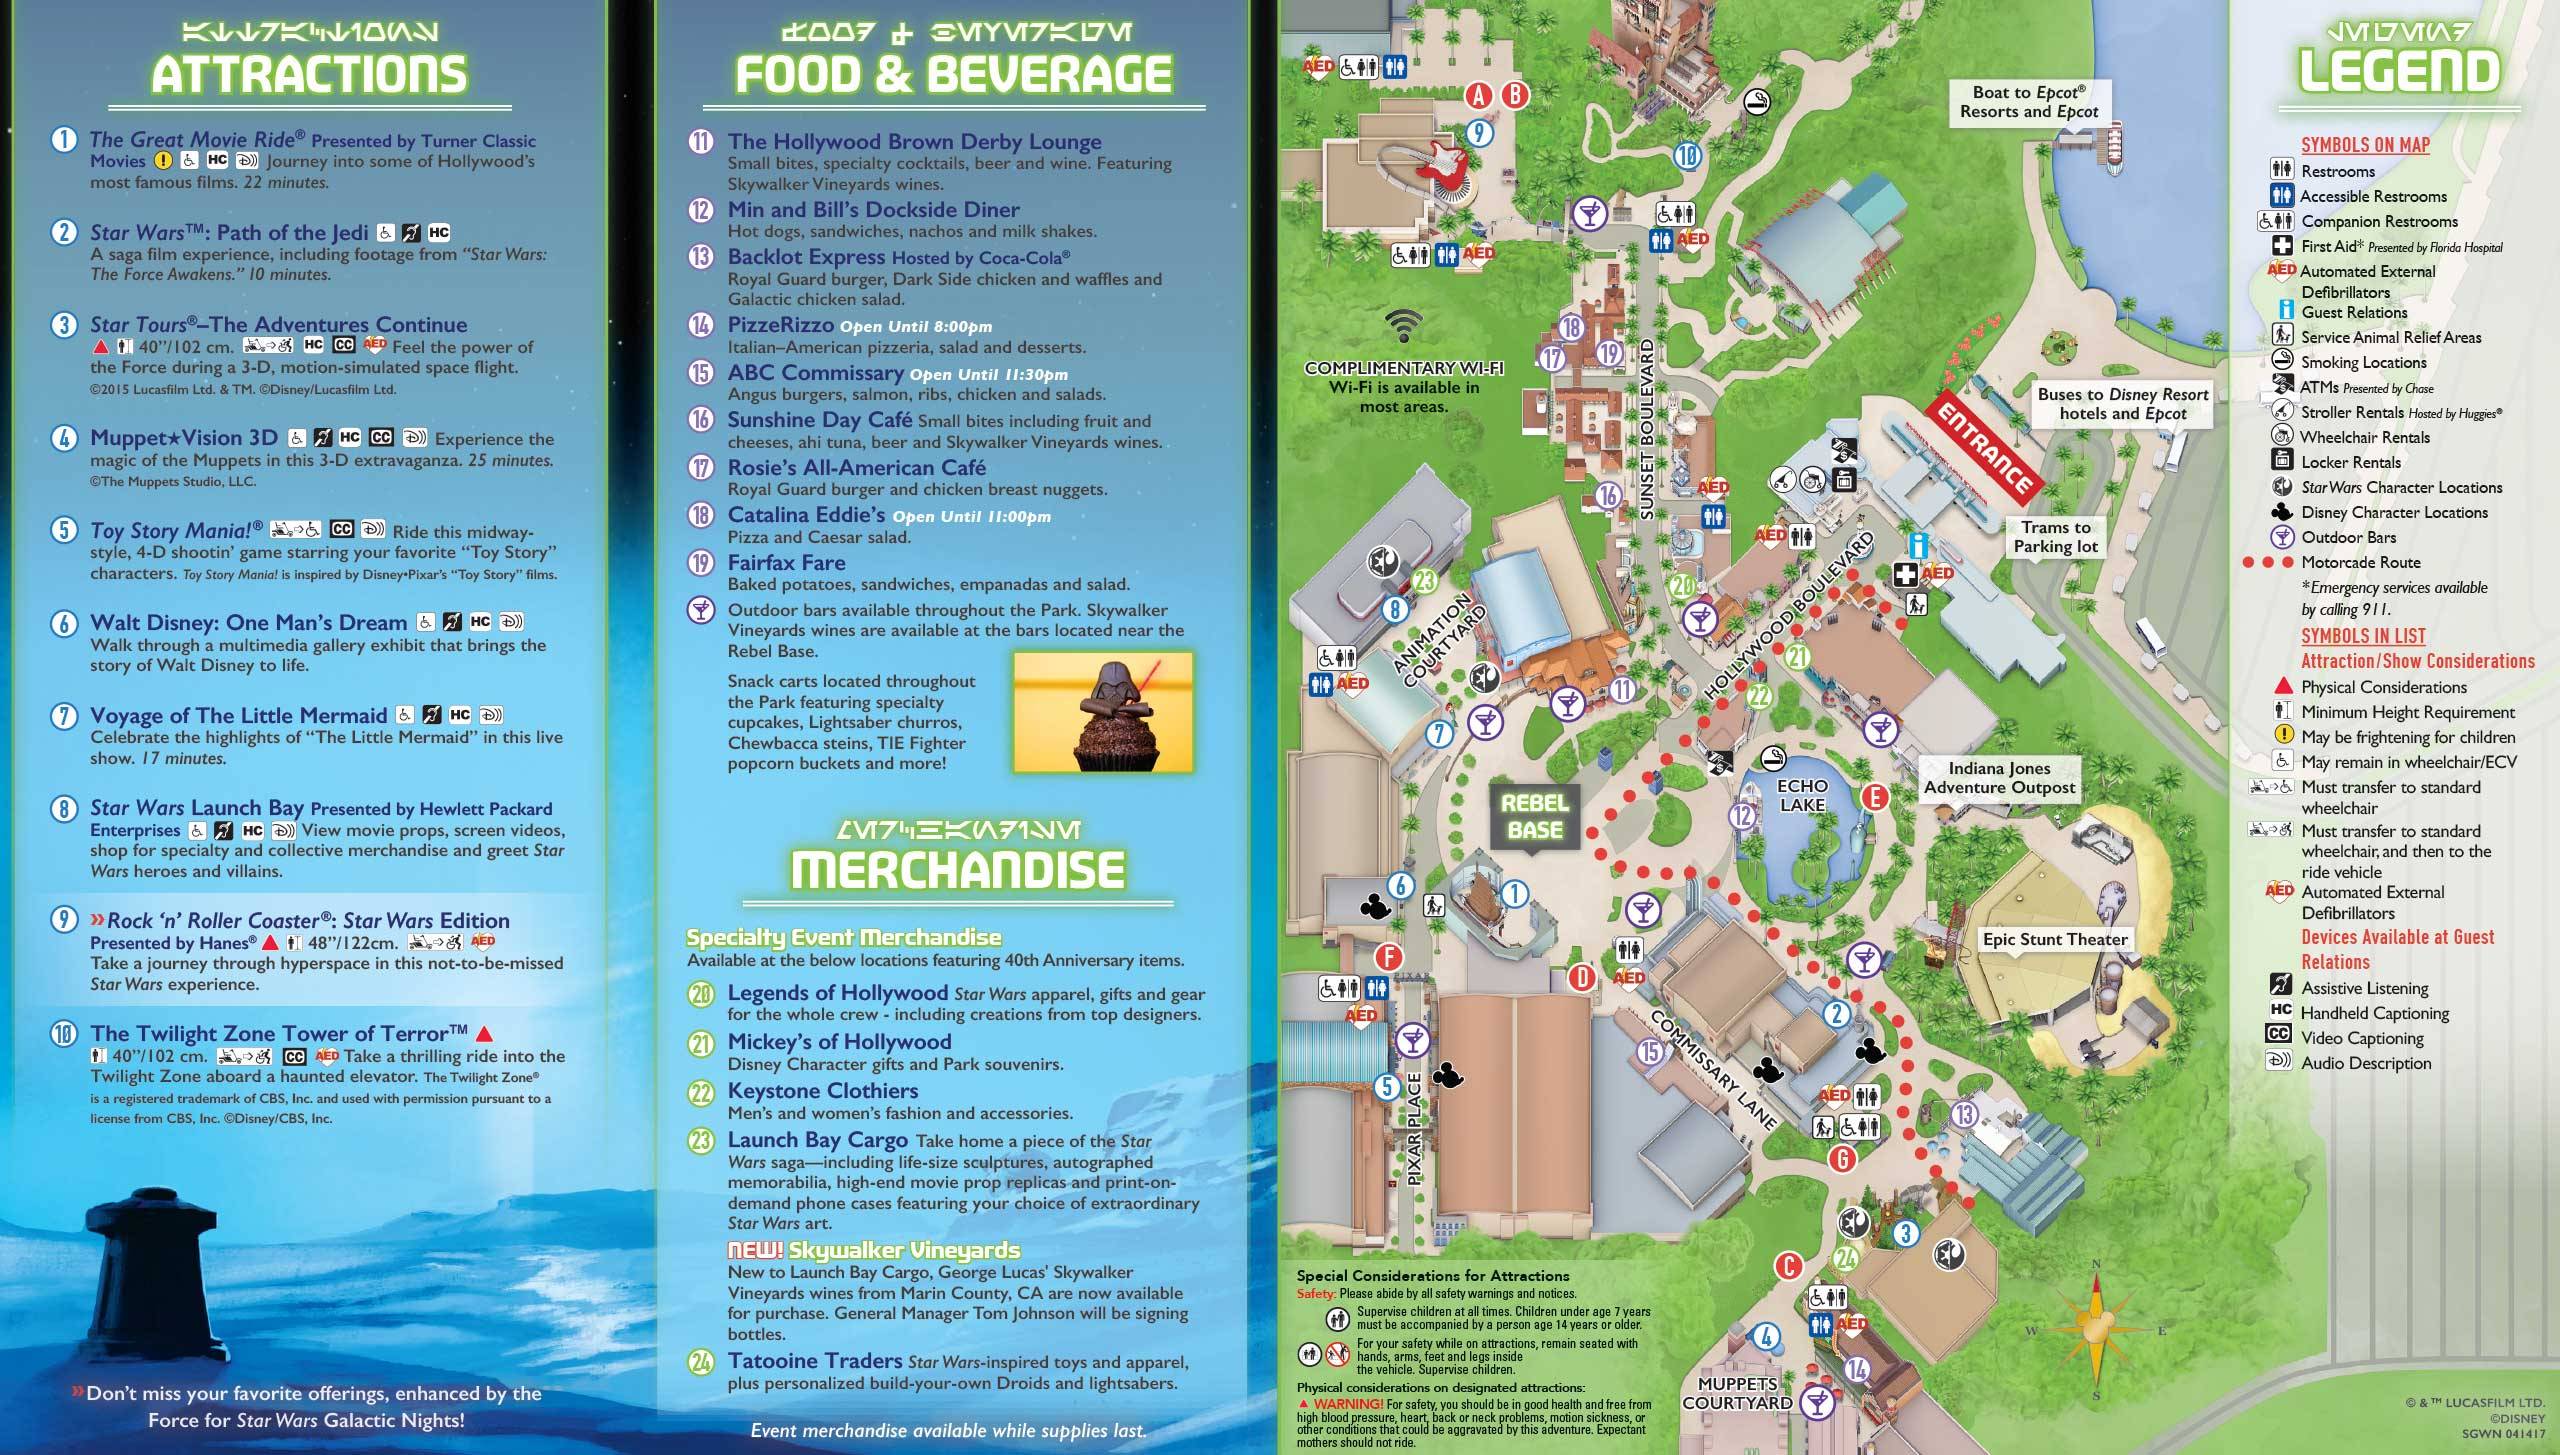 Star Wars Galactic Nights guide map - Back